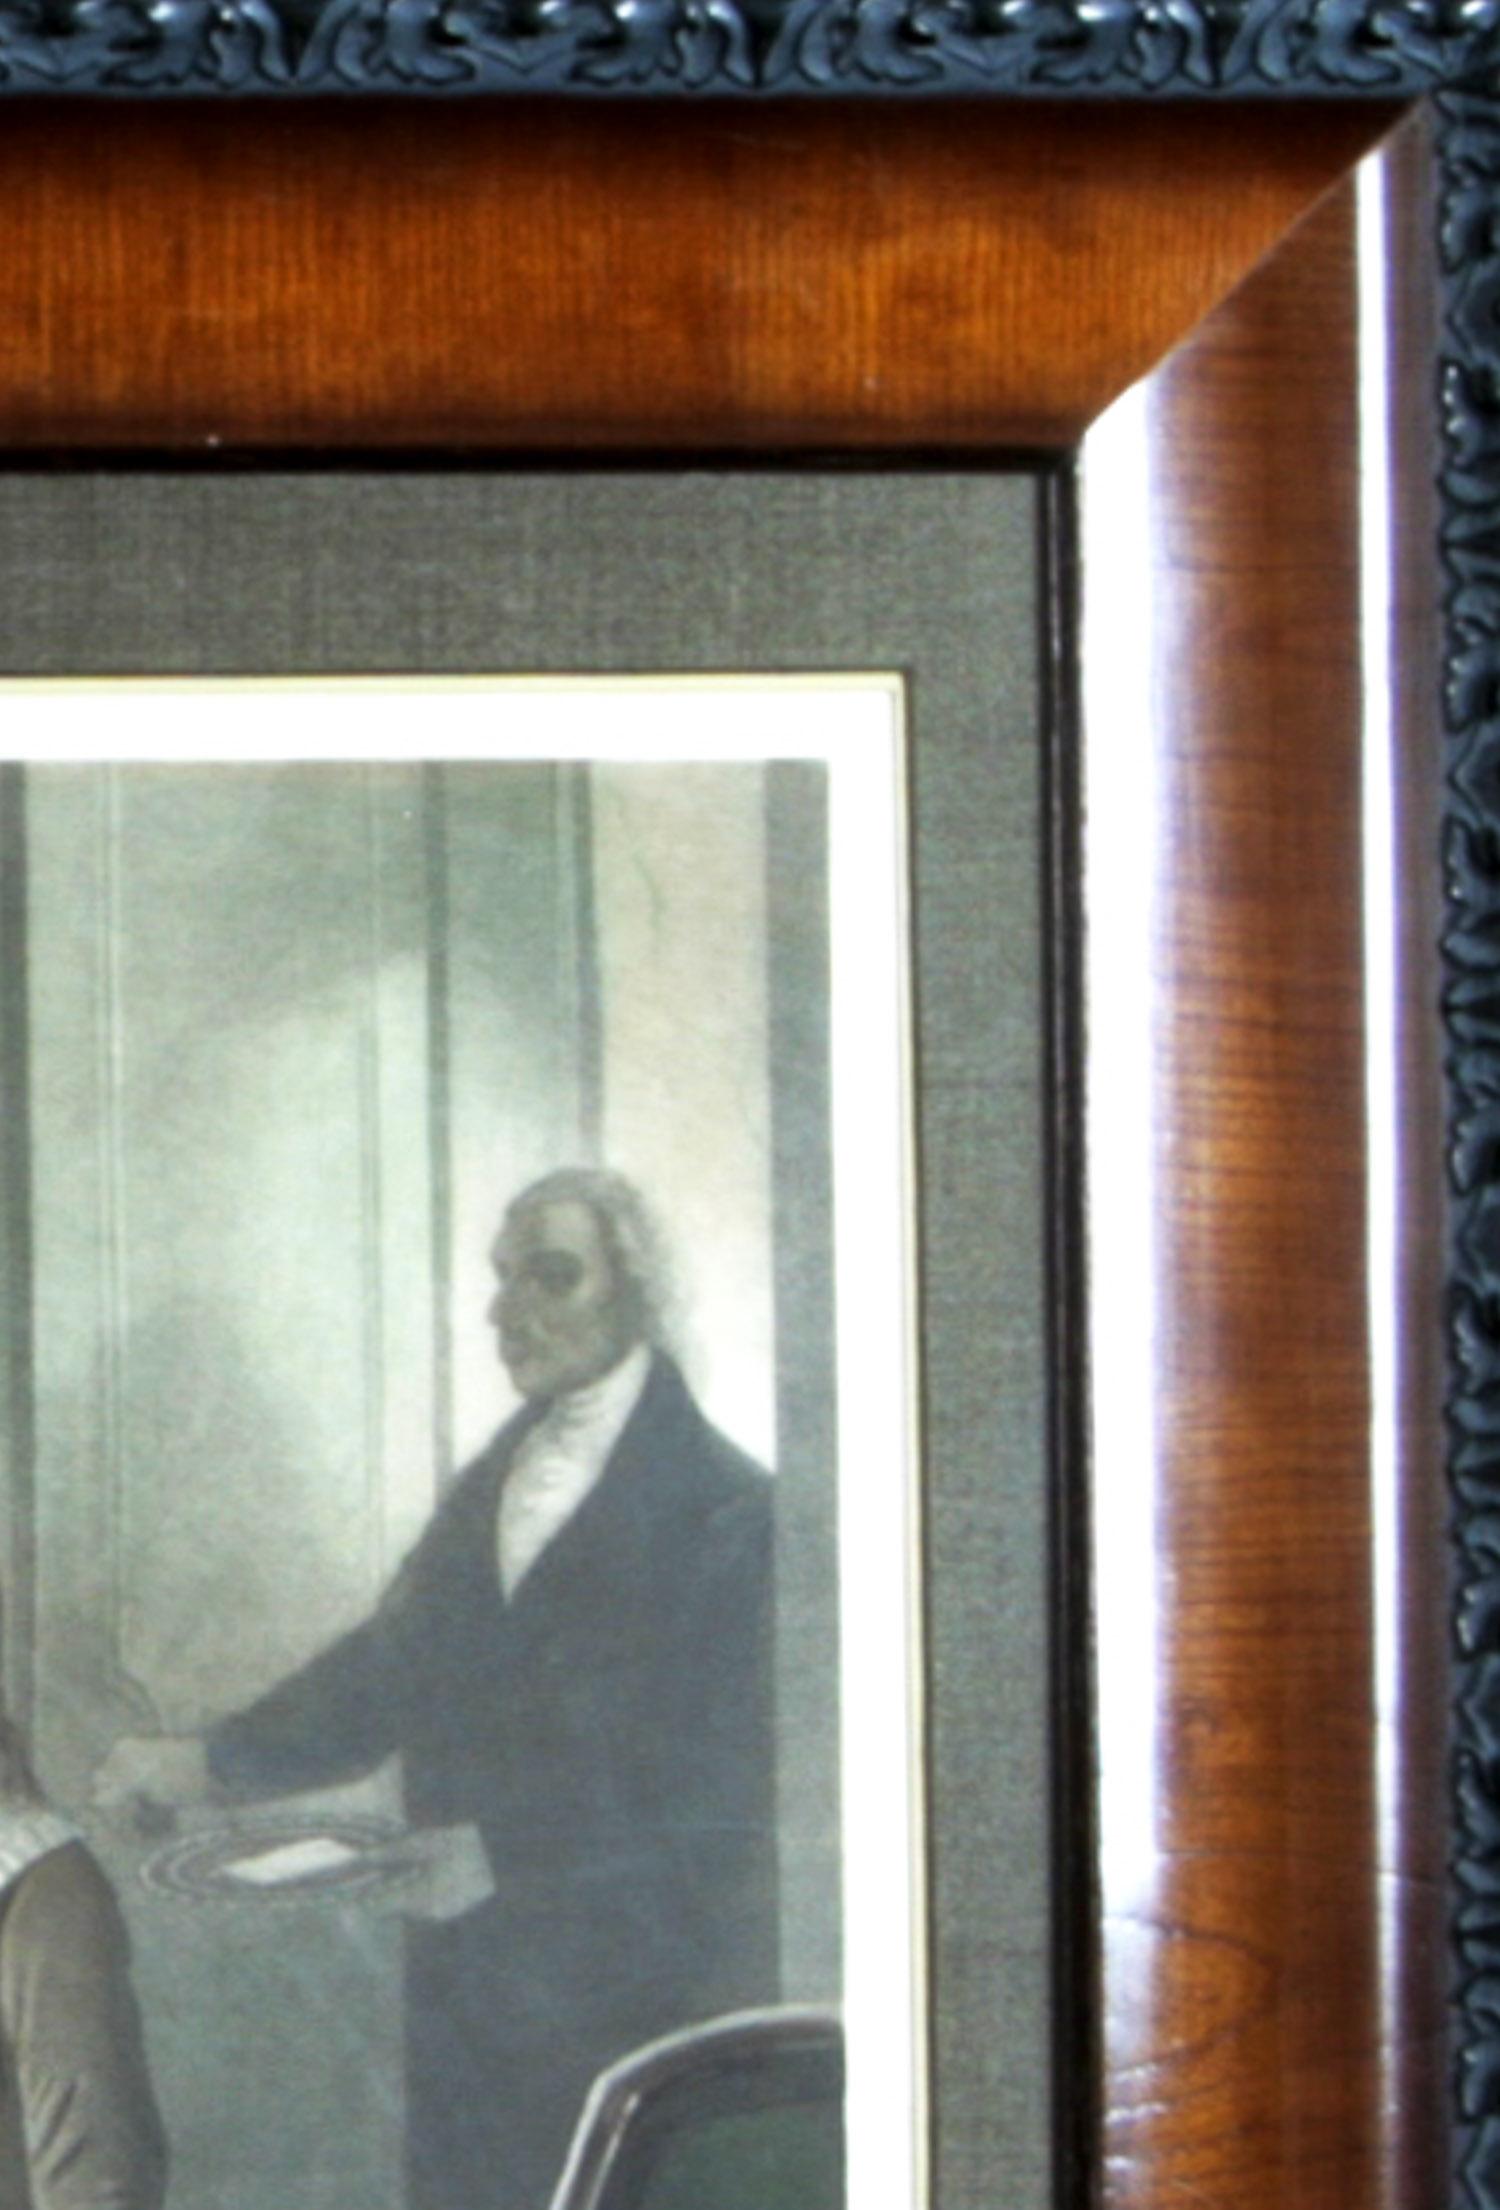       Washington and His Family published in Philadelphia in 1884 by Bradlee & Co. This impressive mezzotint was engraved by William Sartain after a painting by the well-known Philadelphia artist Christian Schussele. Sartain was considered one of